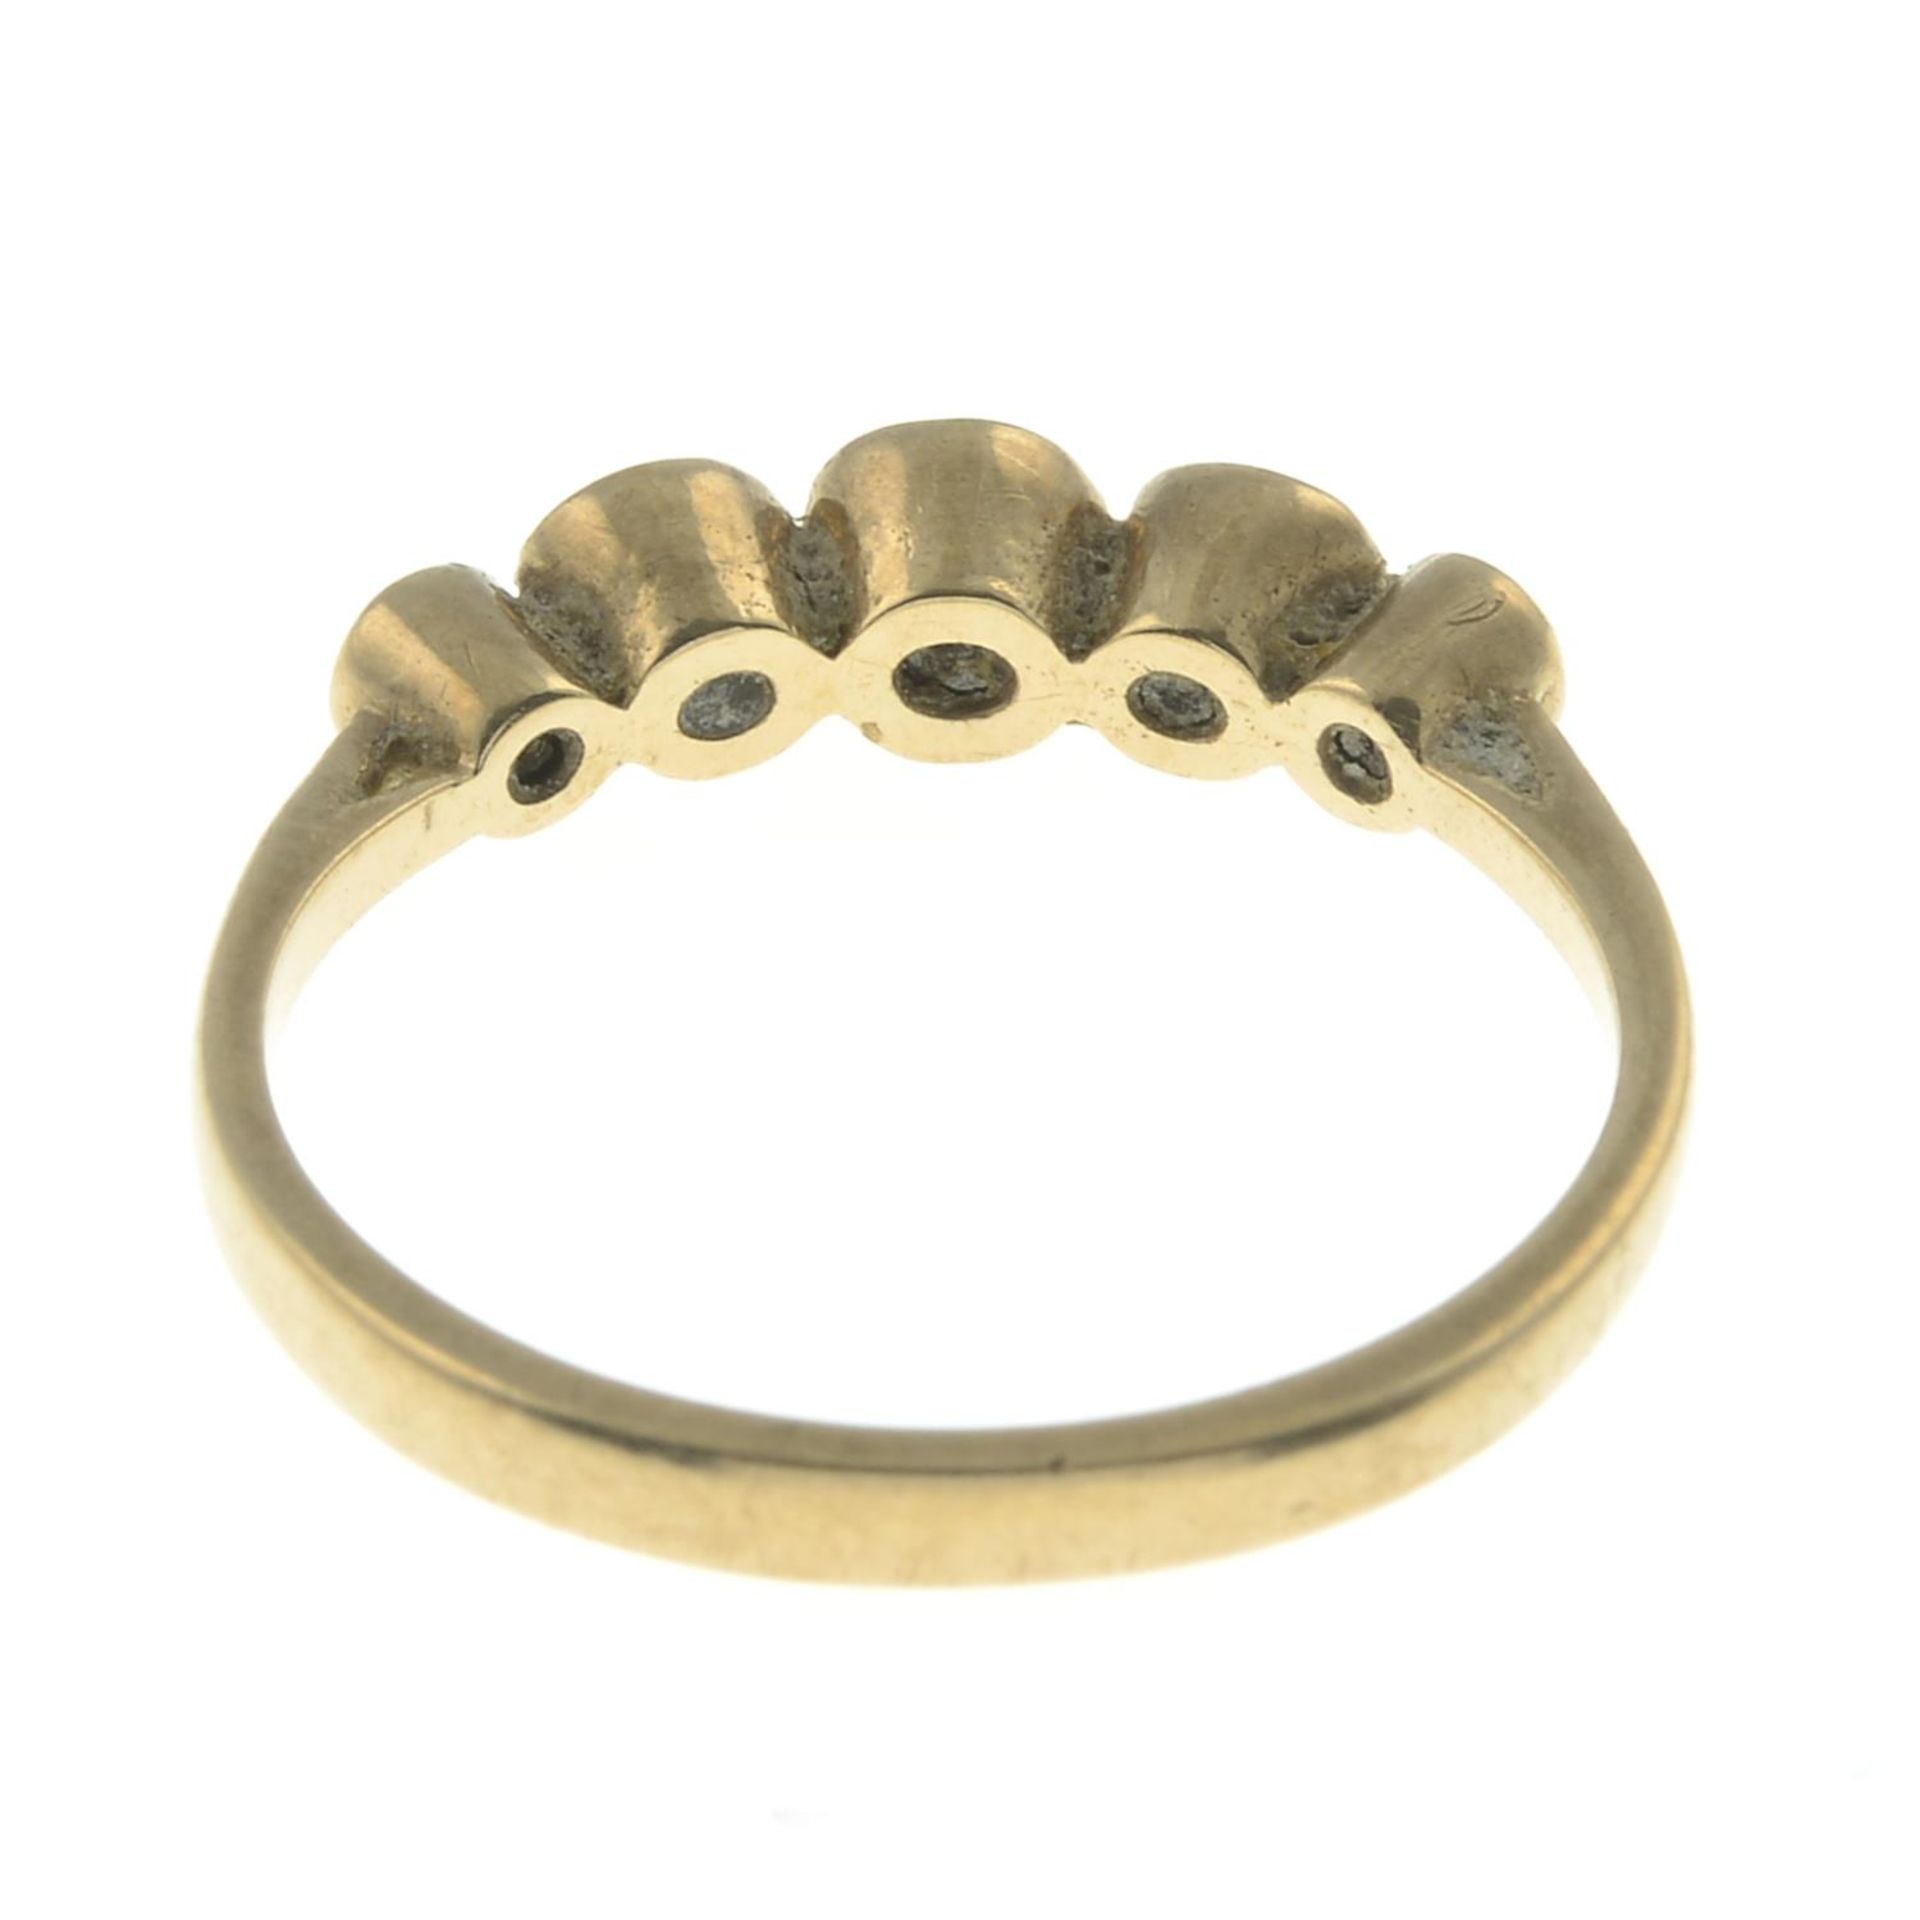 A 9ct gold cubic zirconia five-stone ring.Hallmarks for 9ct gold. - Image 2 of 2